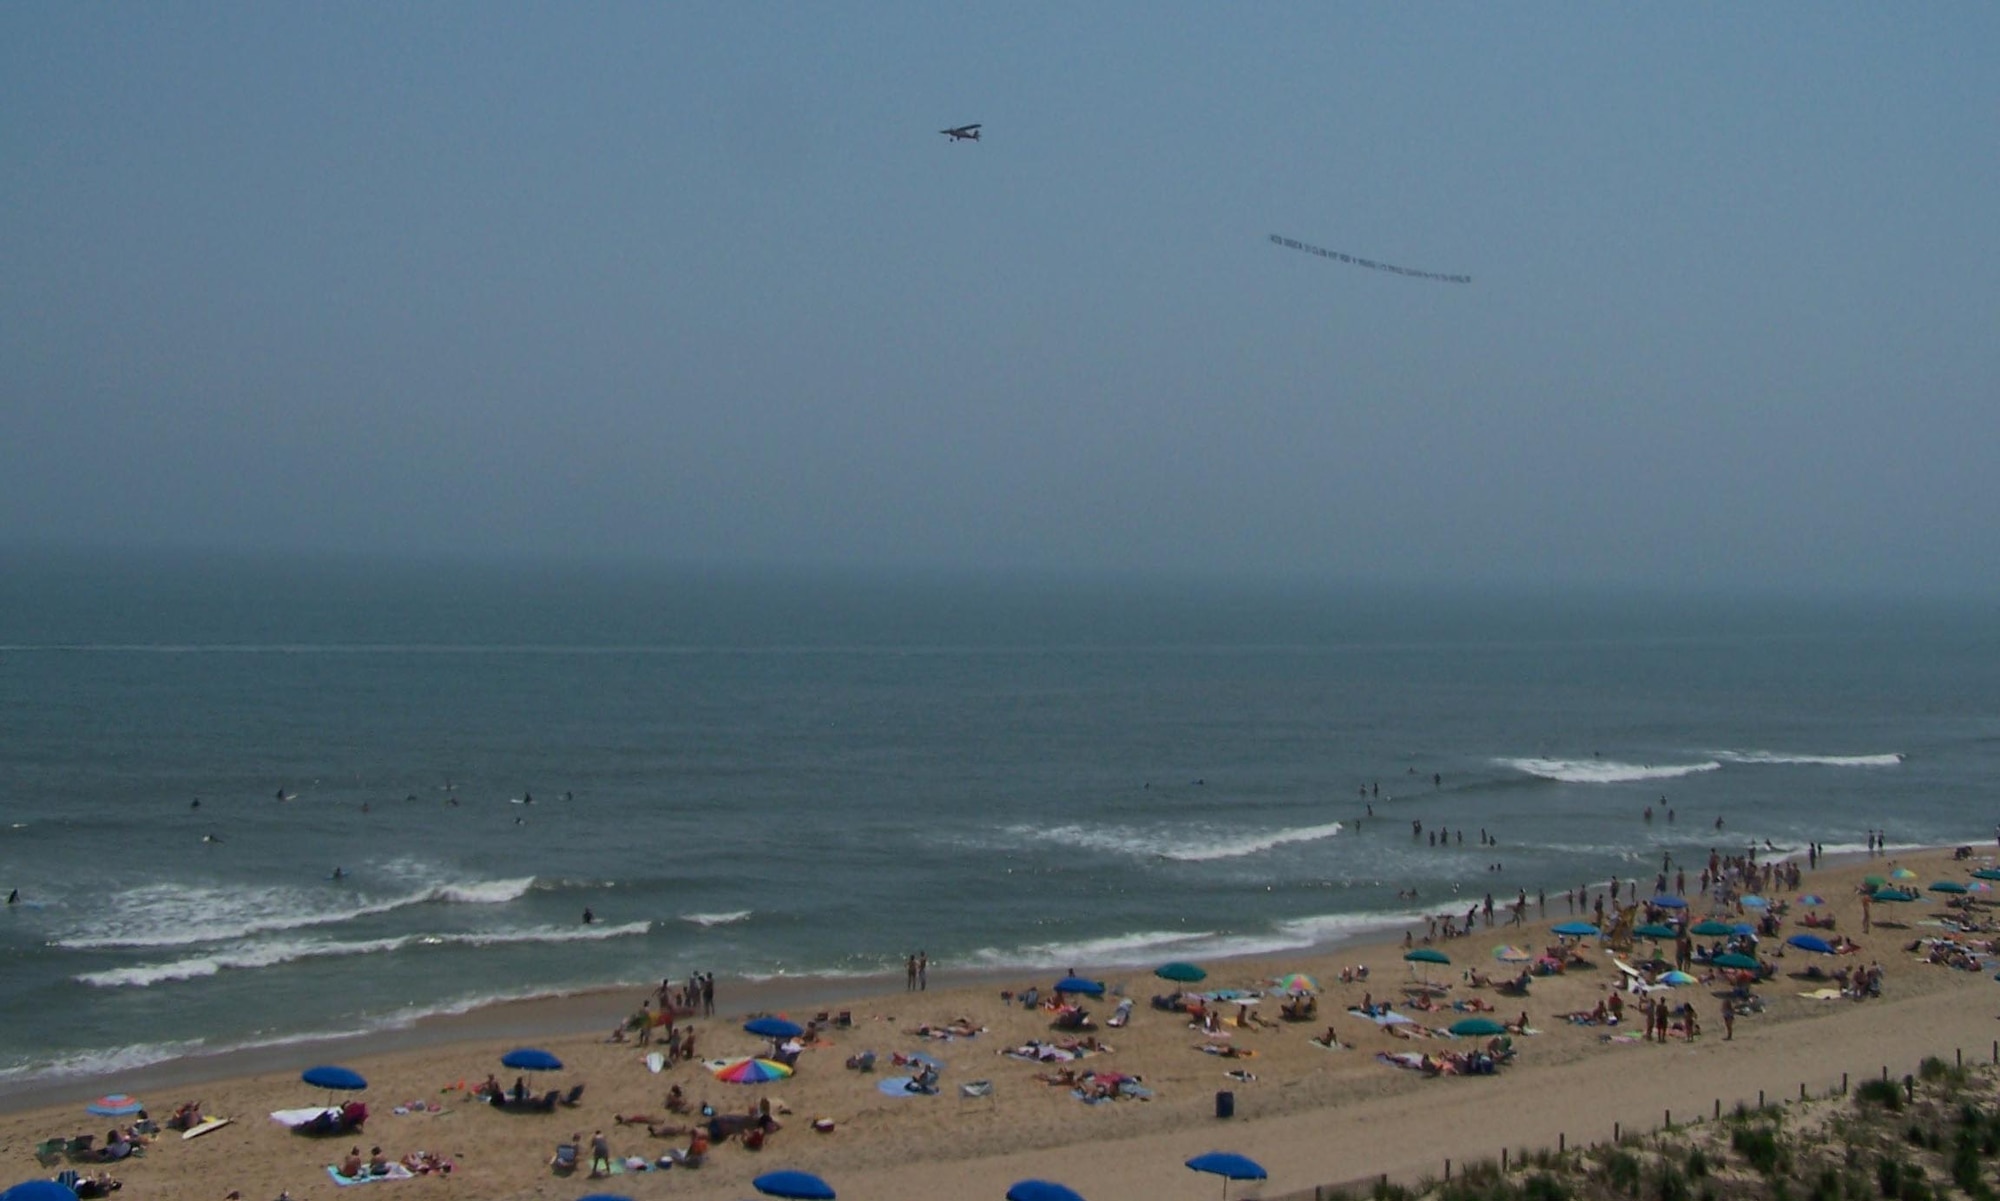 A banner-towing small civilian aircraft owns the sky over Ocean City, Md. shortly before a five-ship large formation of Delaware Air National Guard C-130 transport aircraft from the 166th Airlift Wing in New Castle, Del. flew overhead.  Beachgoers at Md. and Del. coastal areas saw part of the 700-mile, three-hour training flight on June 7, 2008 over four states (Del., Md., Va., and N.J.) culminating in an airdrop over Coyle Field, N.J. and a return to home station at New Castle Airport, Del.